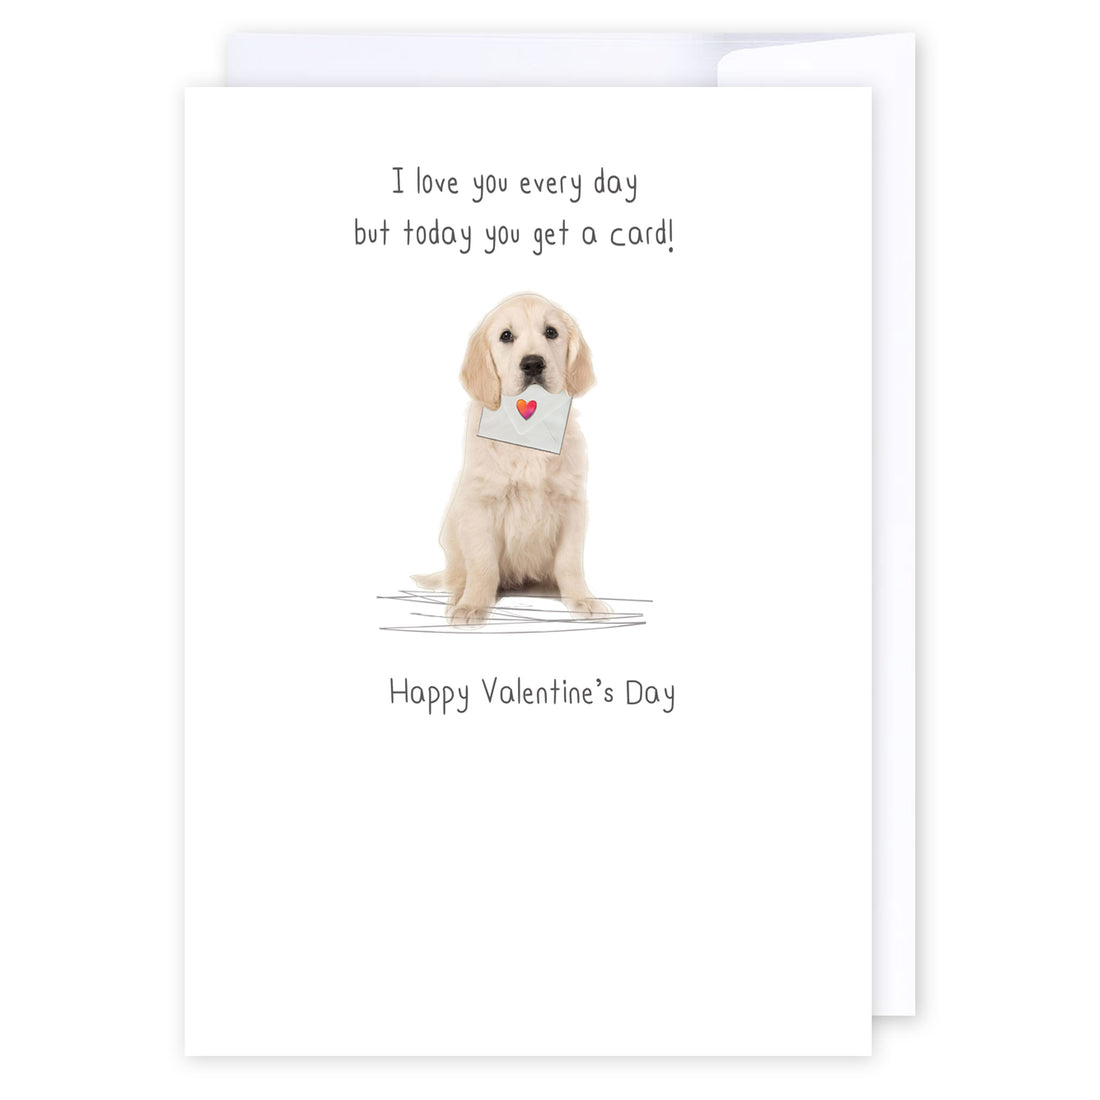 Valentines - Today you get a card